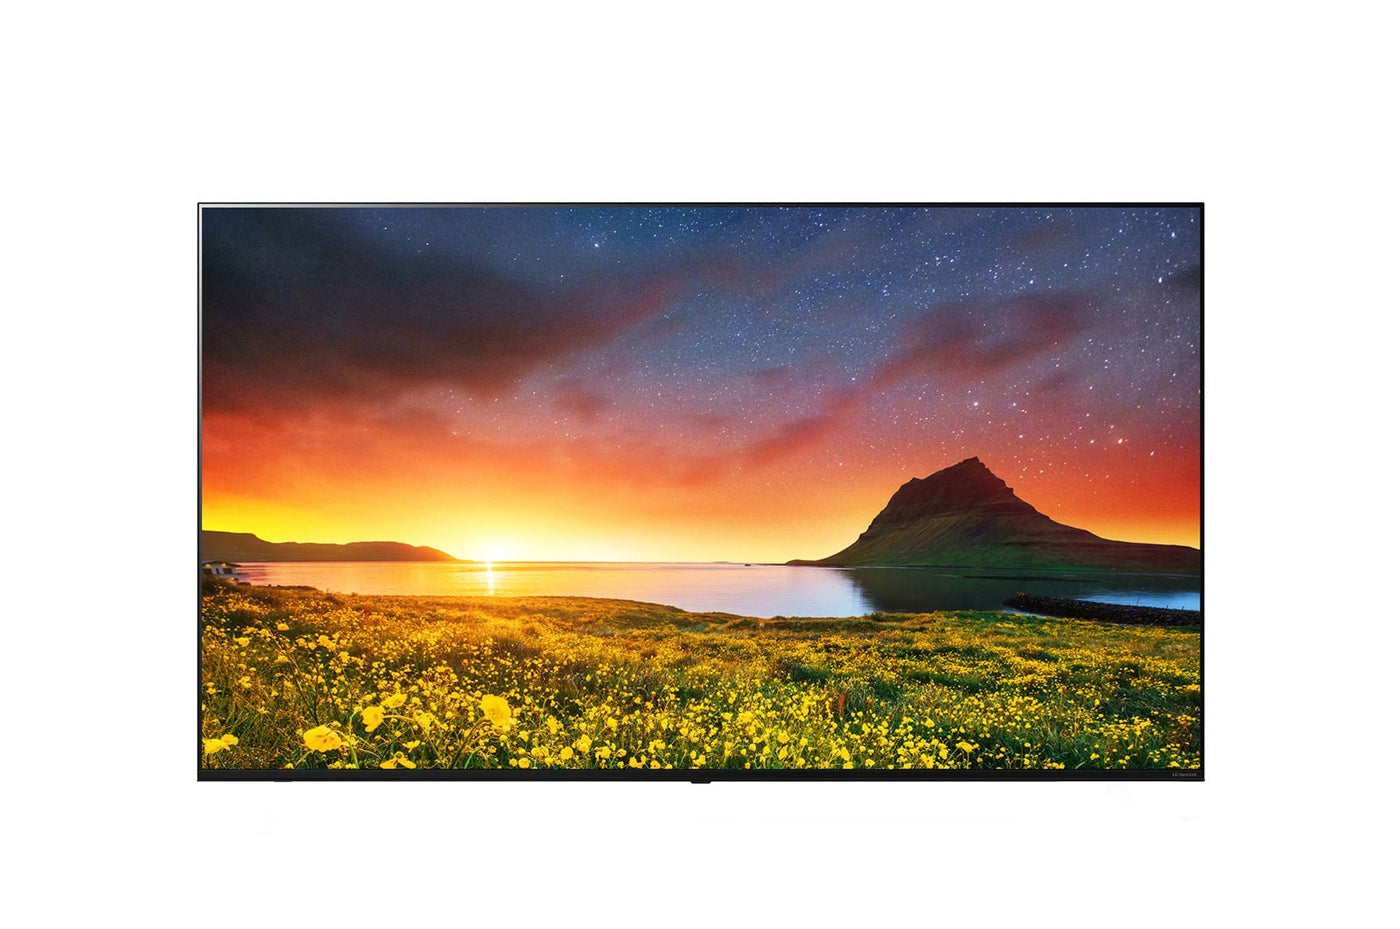 LG 55UR760H9 55" Pro:Centric 4K UHD Smart Hospitality TV Front View